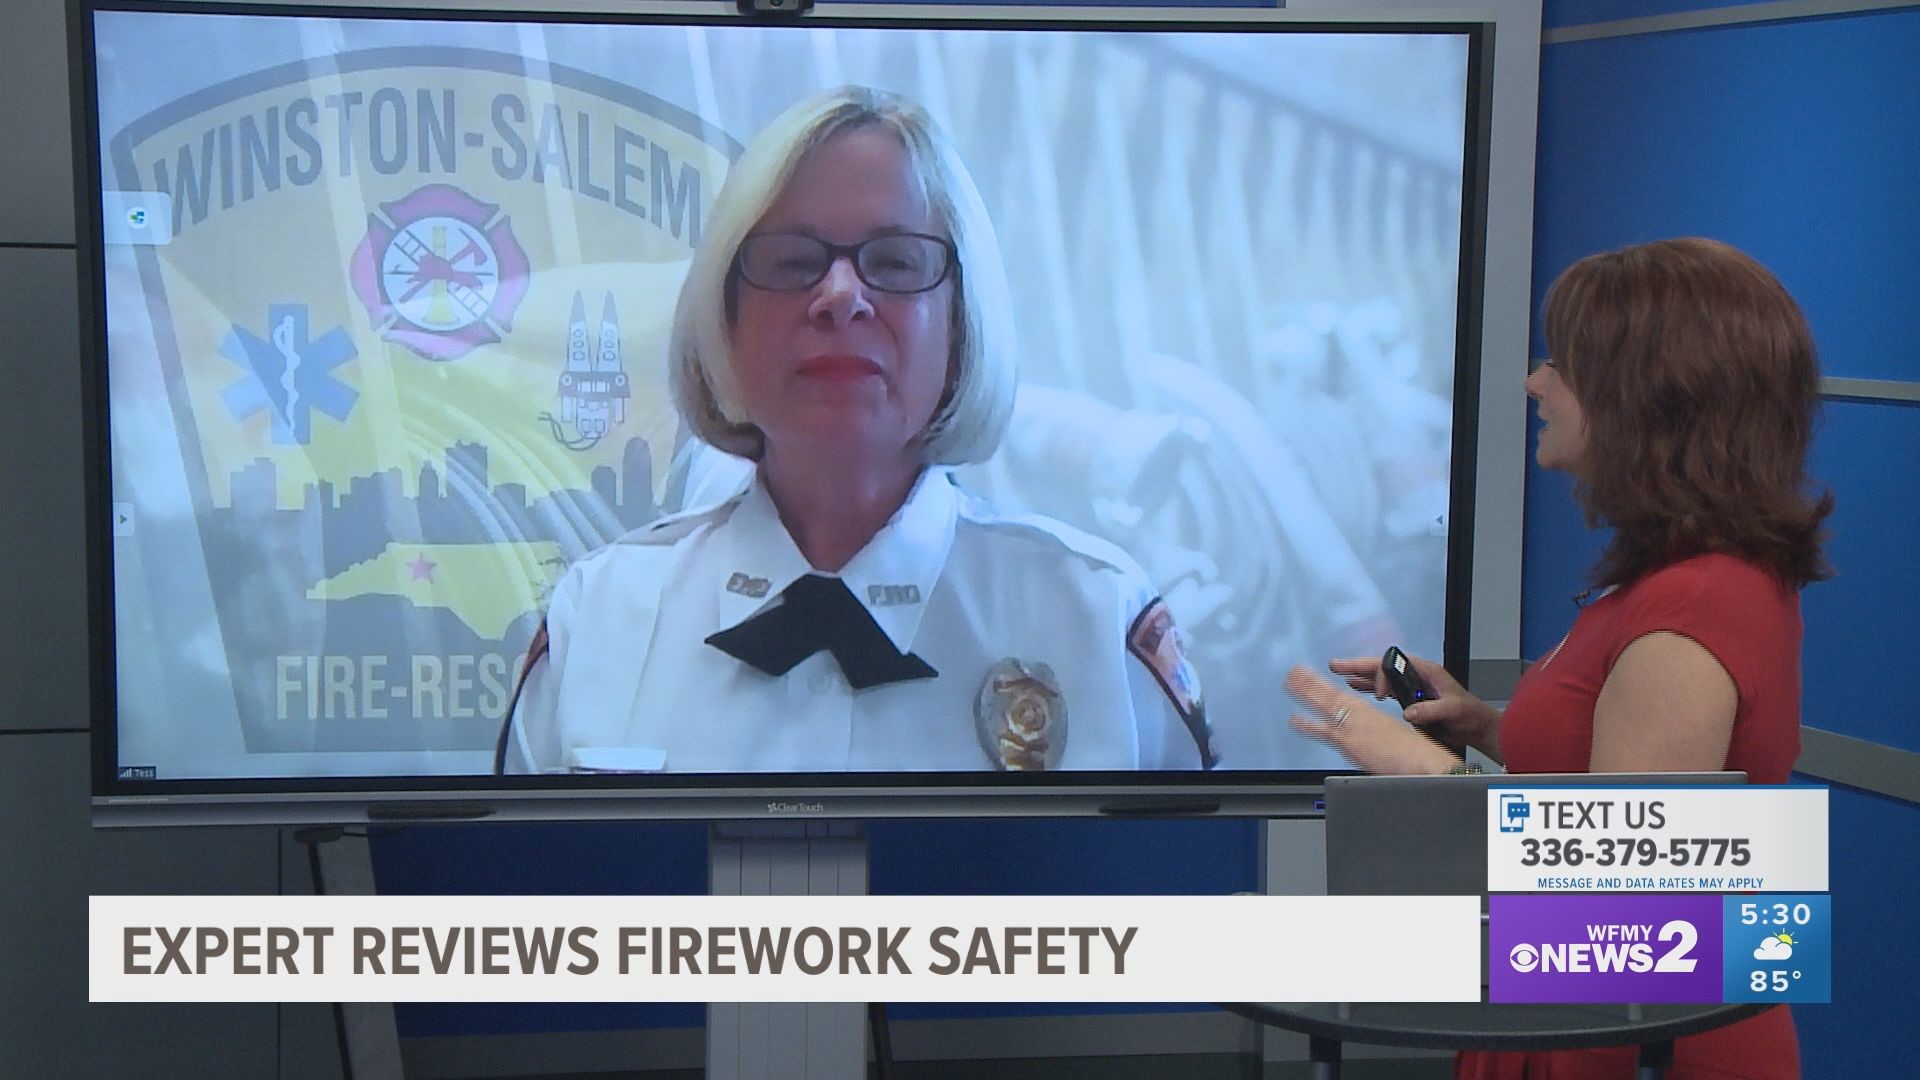 Theresa Knops from the Winston-Salem fire department explains how to handle fireworks safely.